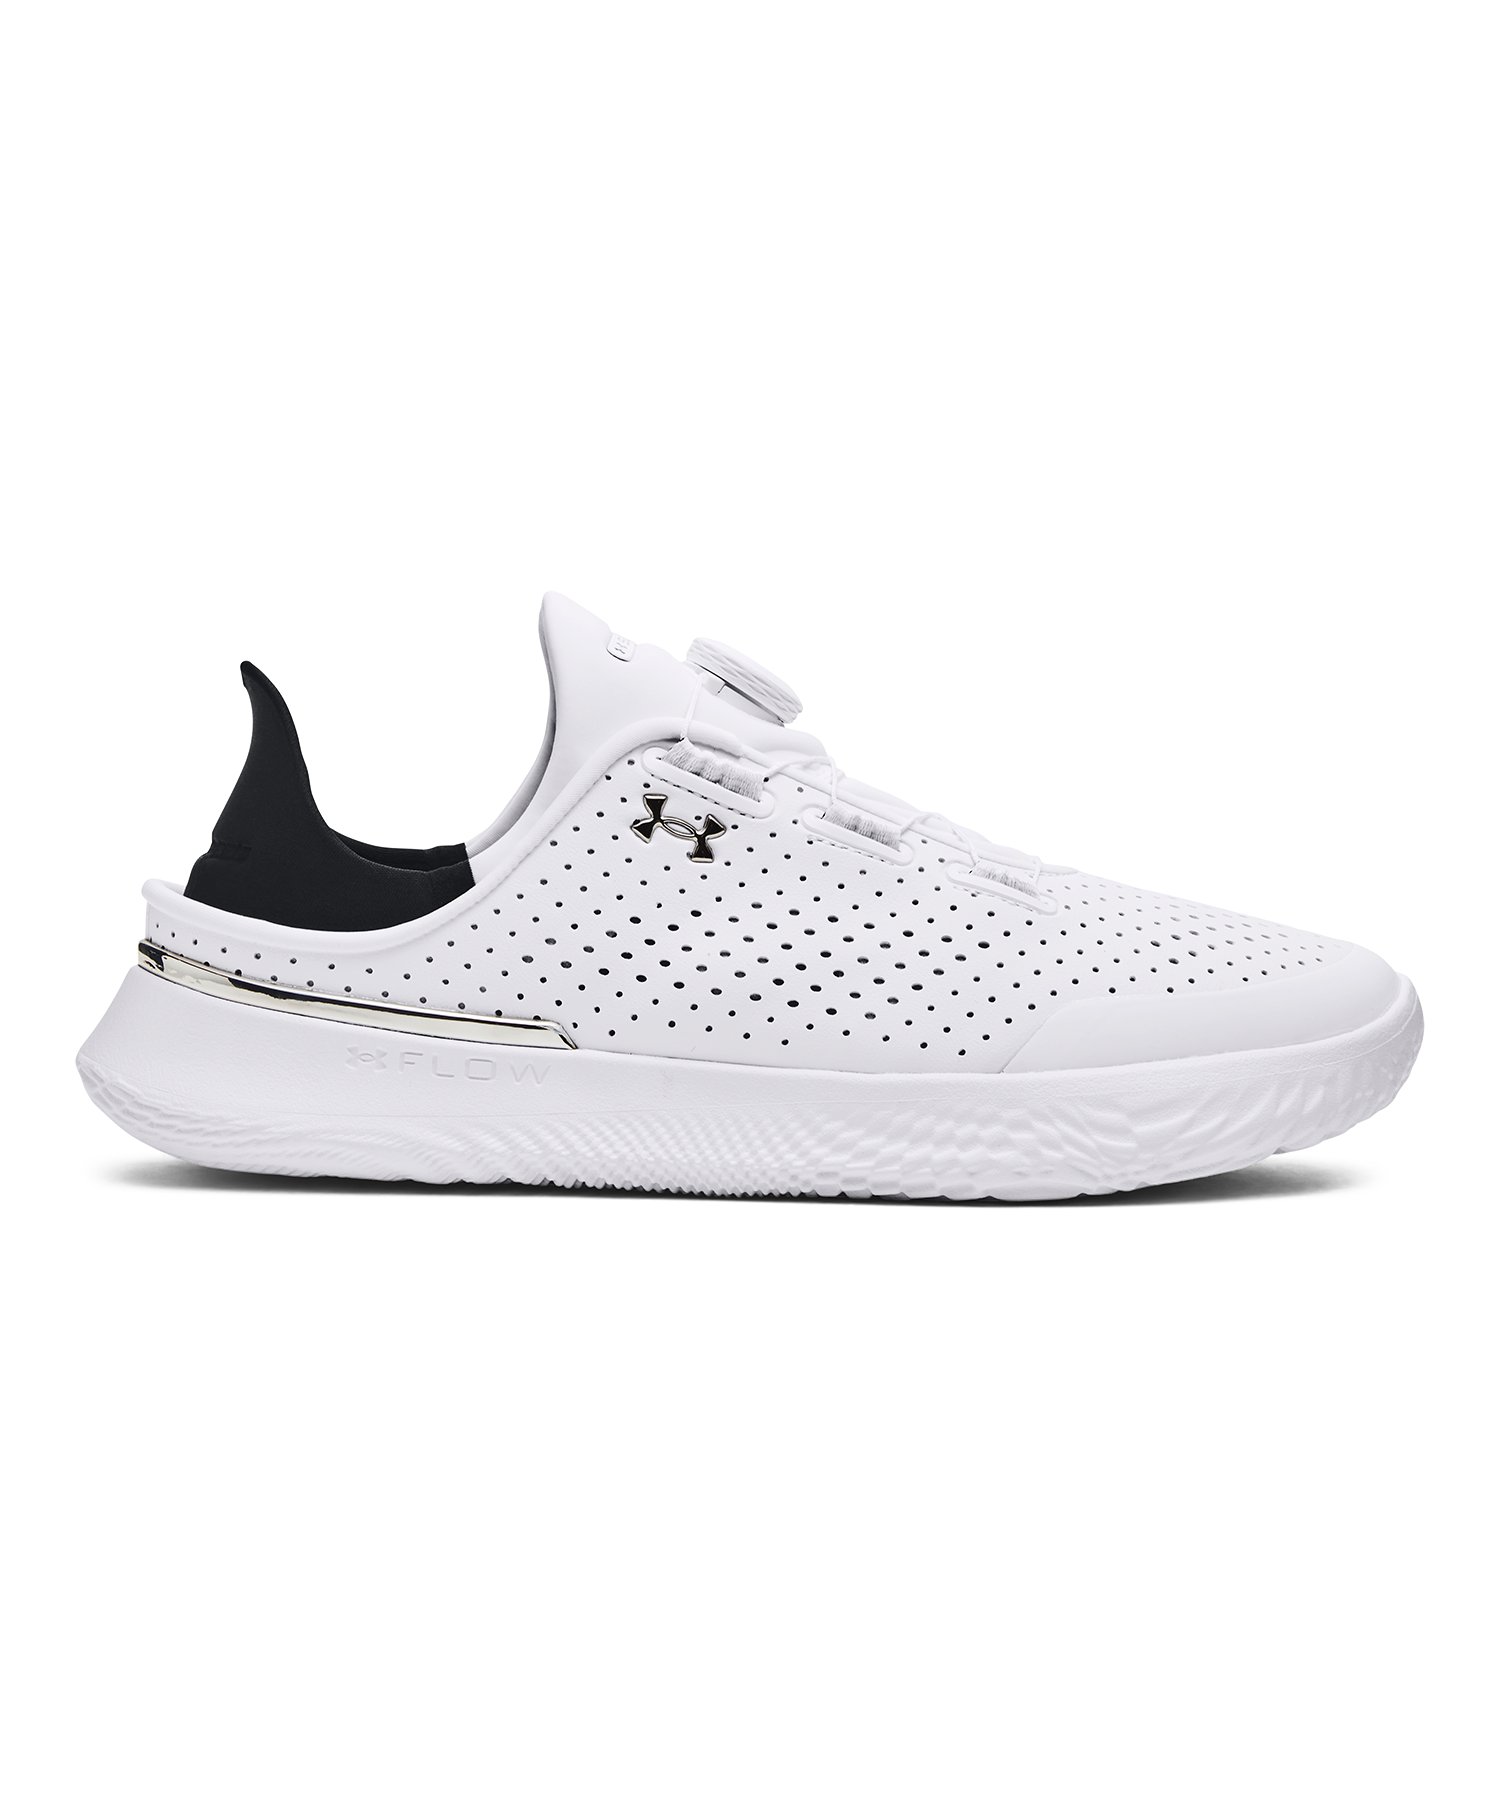 Under Armour Slip Speed Training Shoes White Navy Gold ALL SIZES Men's New